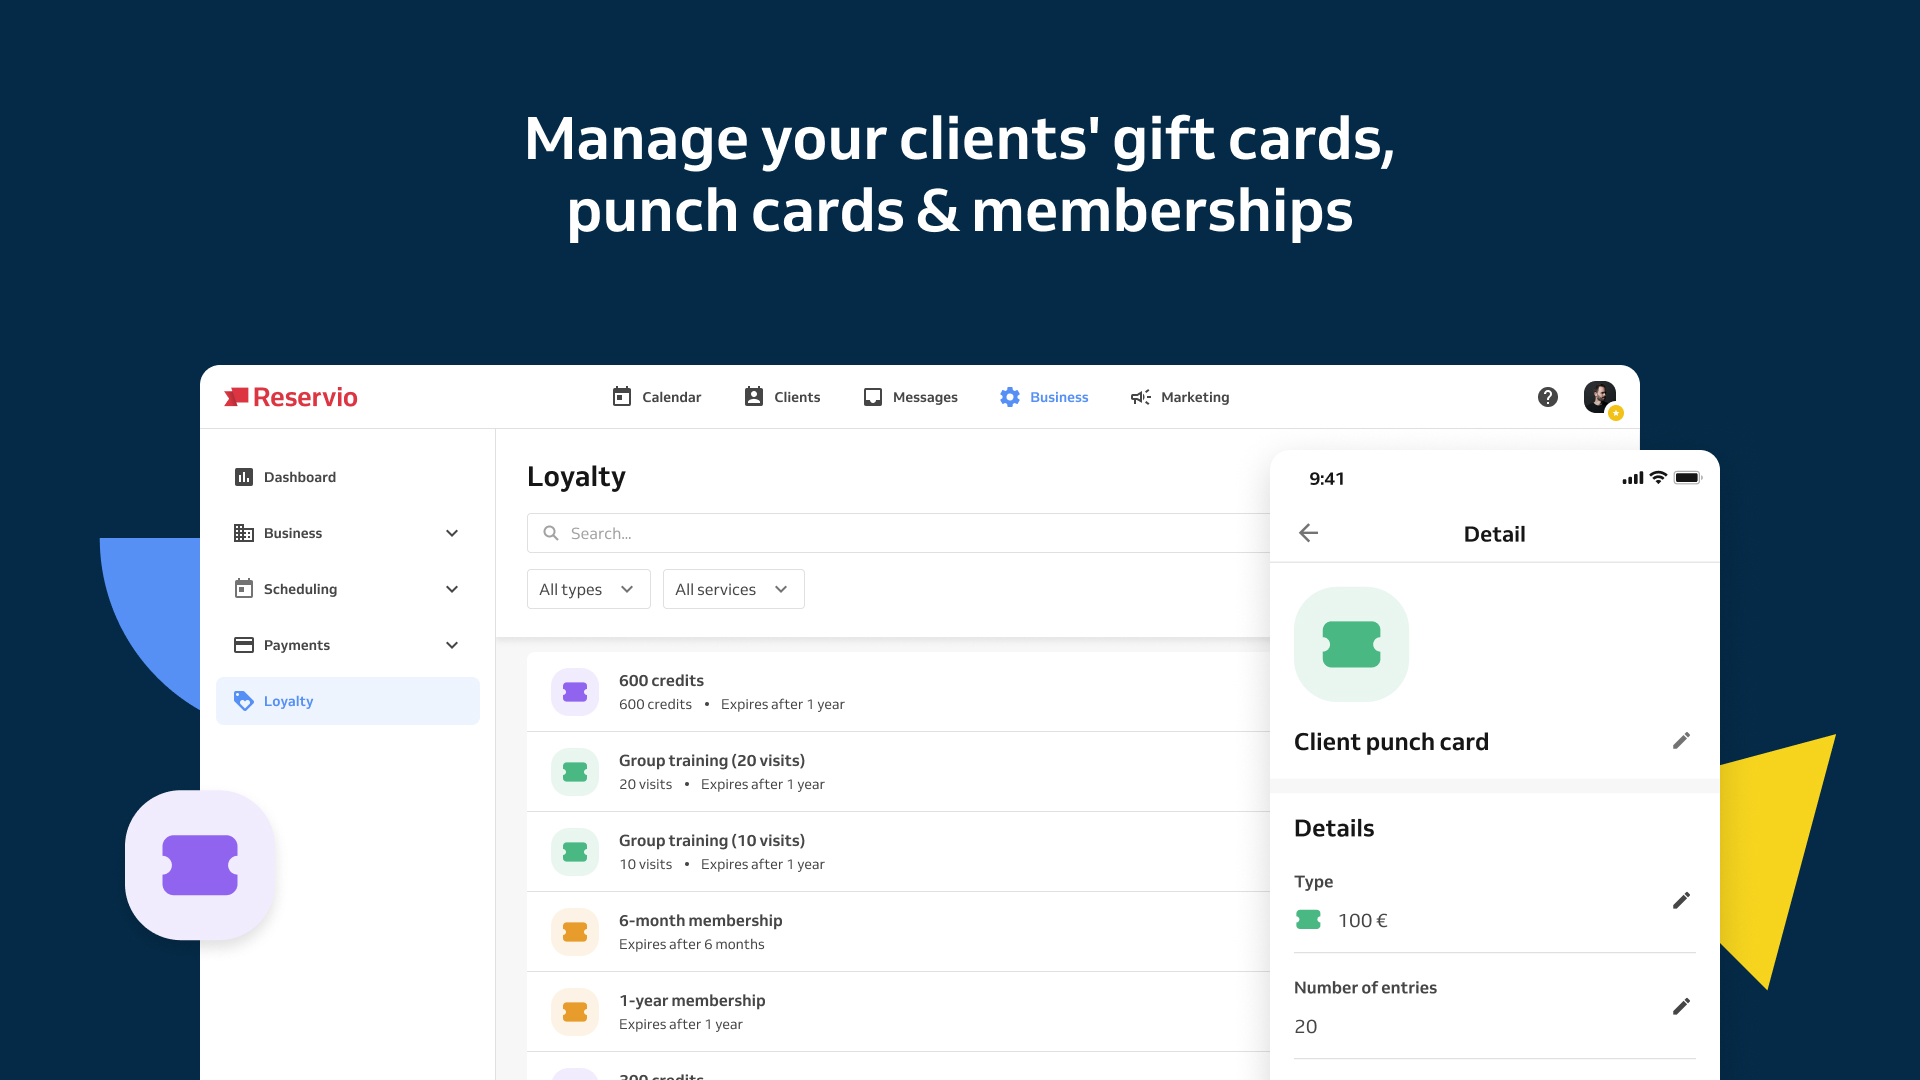 Manage your clients' gift cards, punch cards & memberships